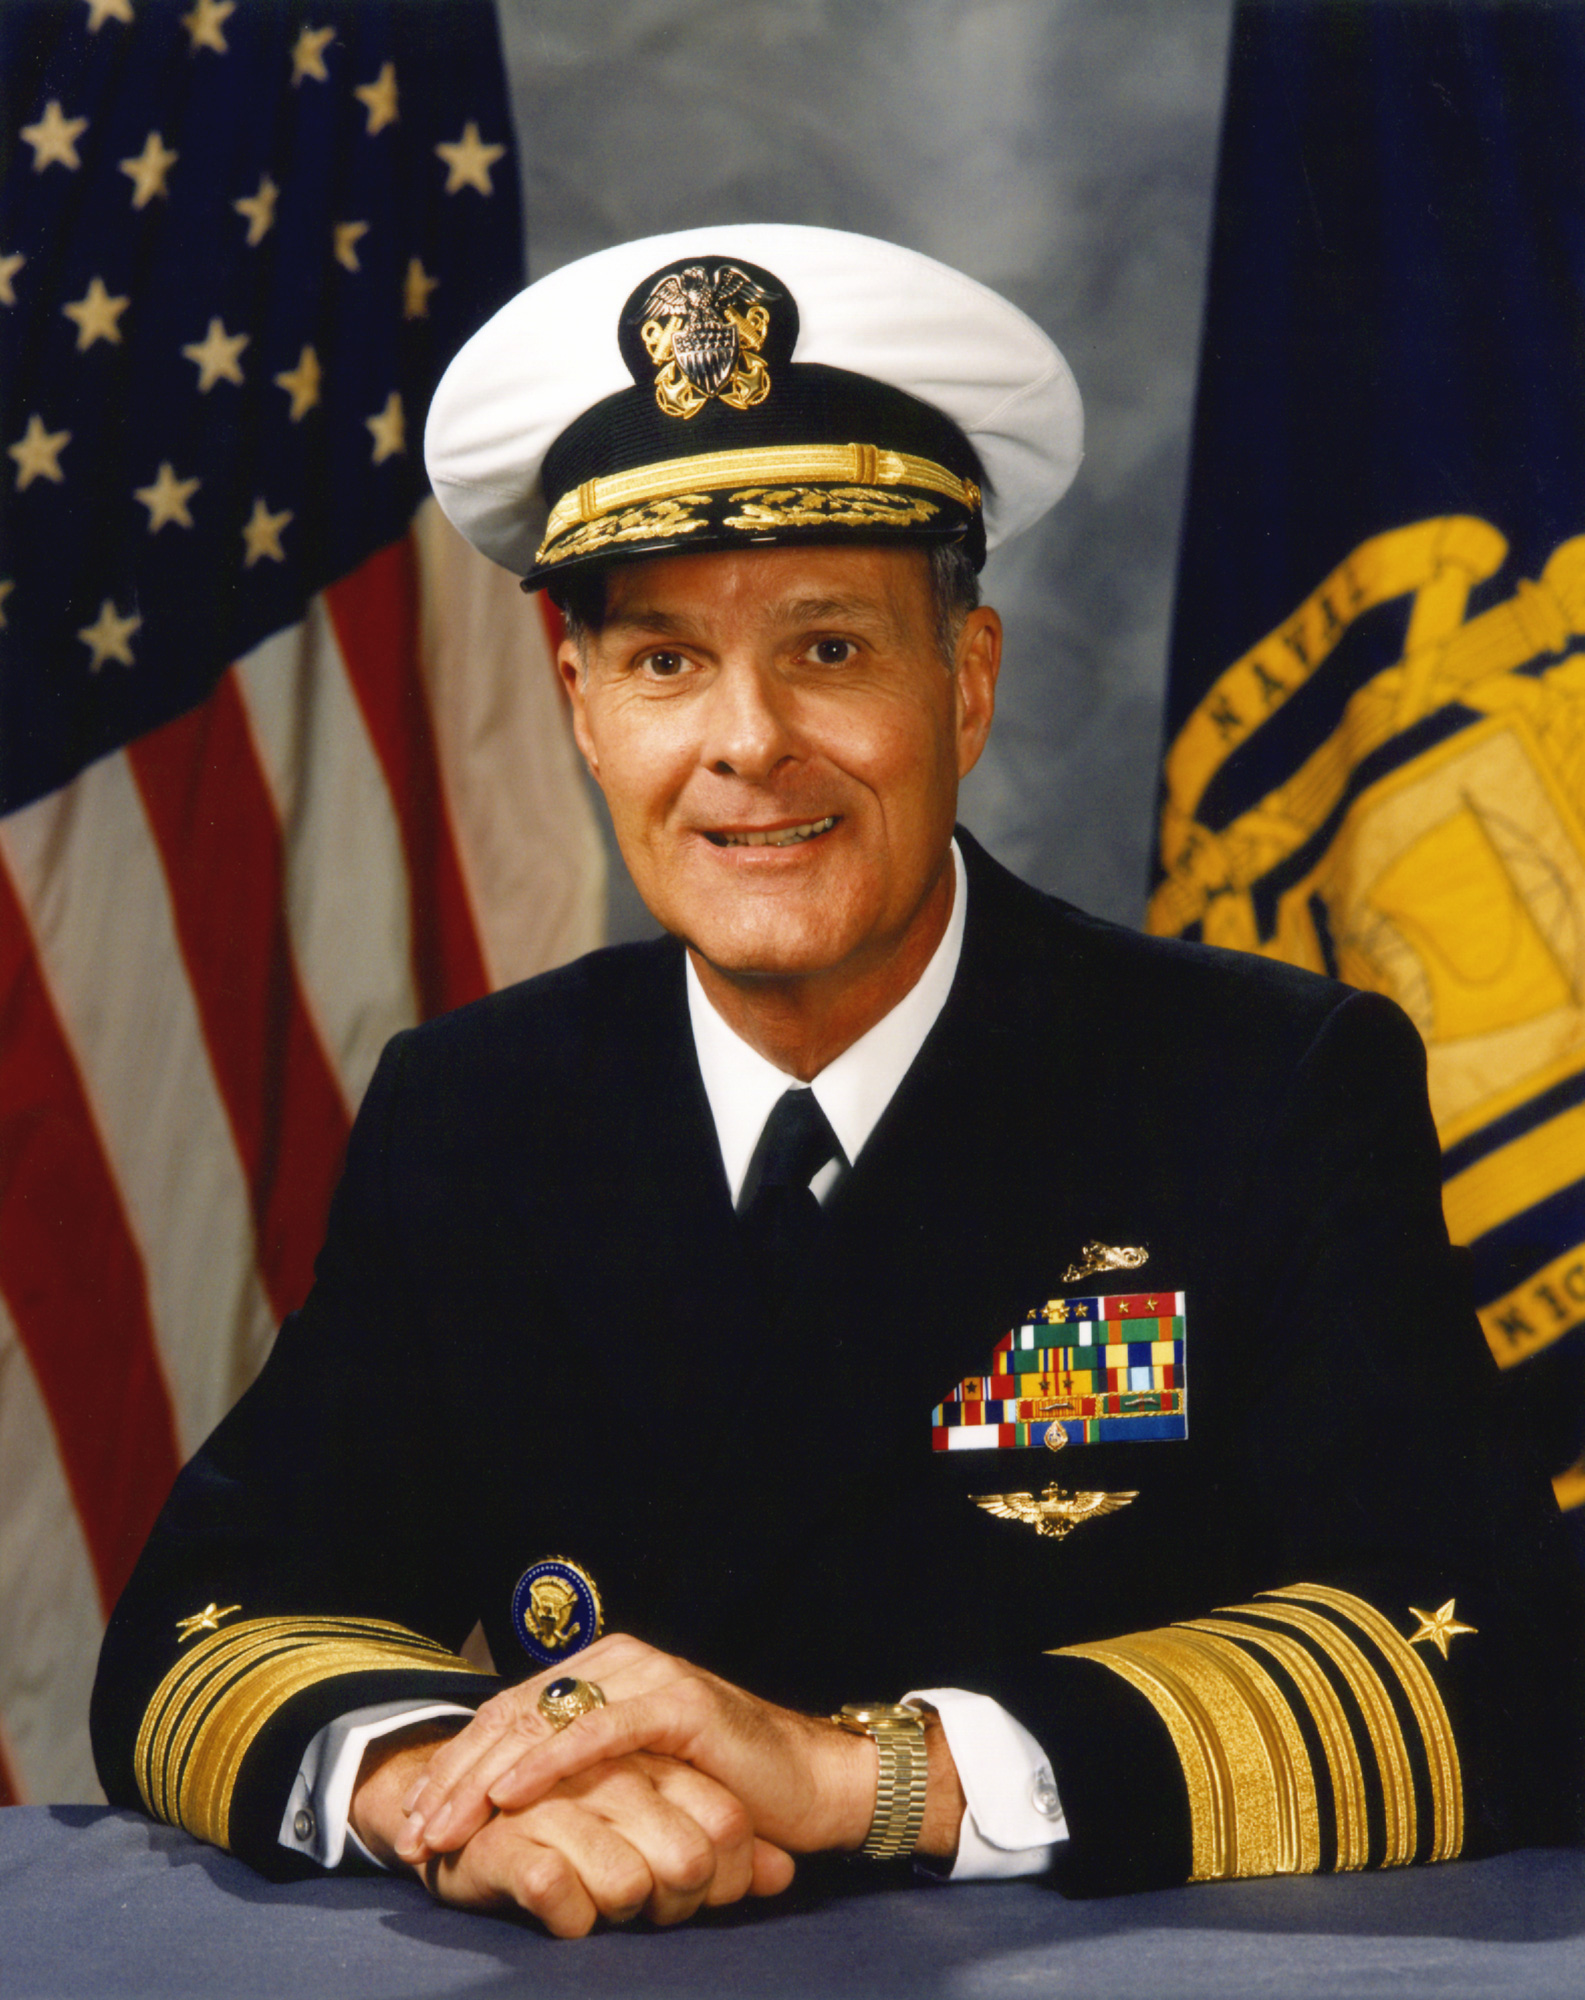 Adm Charles R Larson - official portrait, Superintendent of US Naval Academy